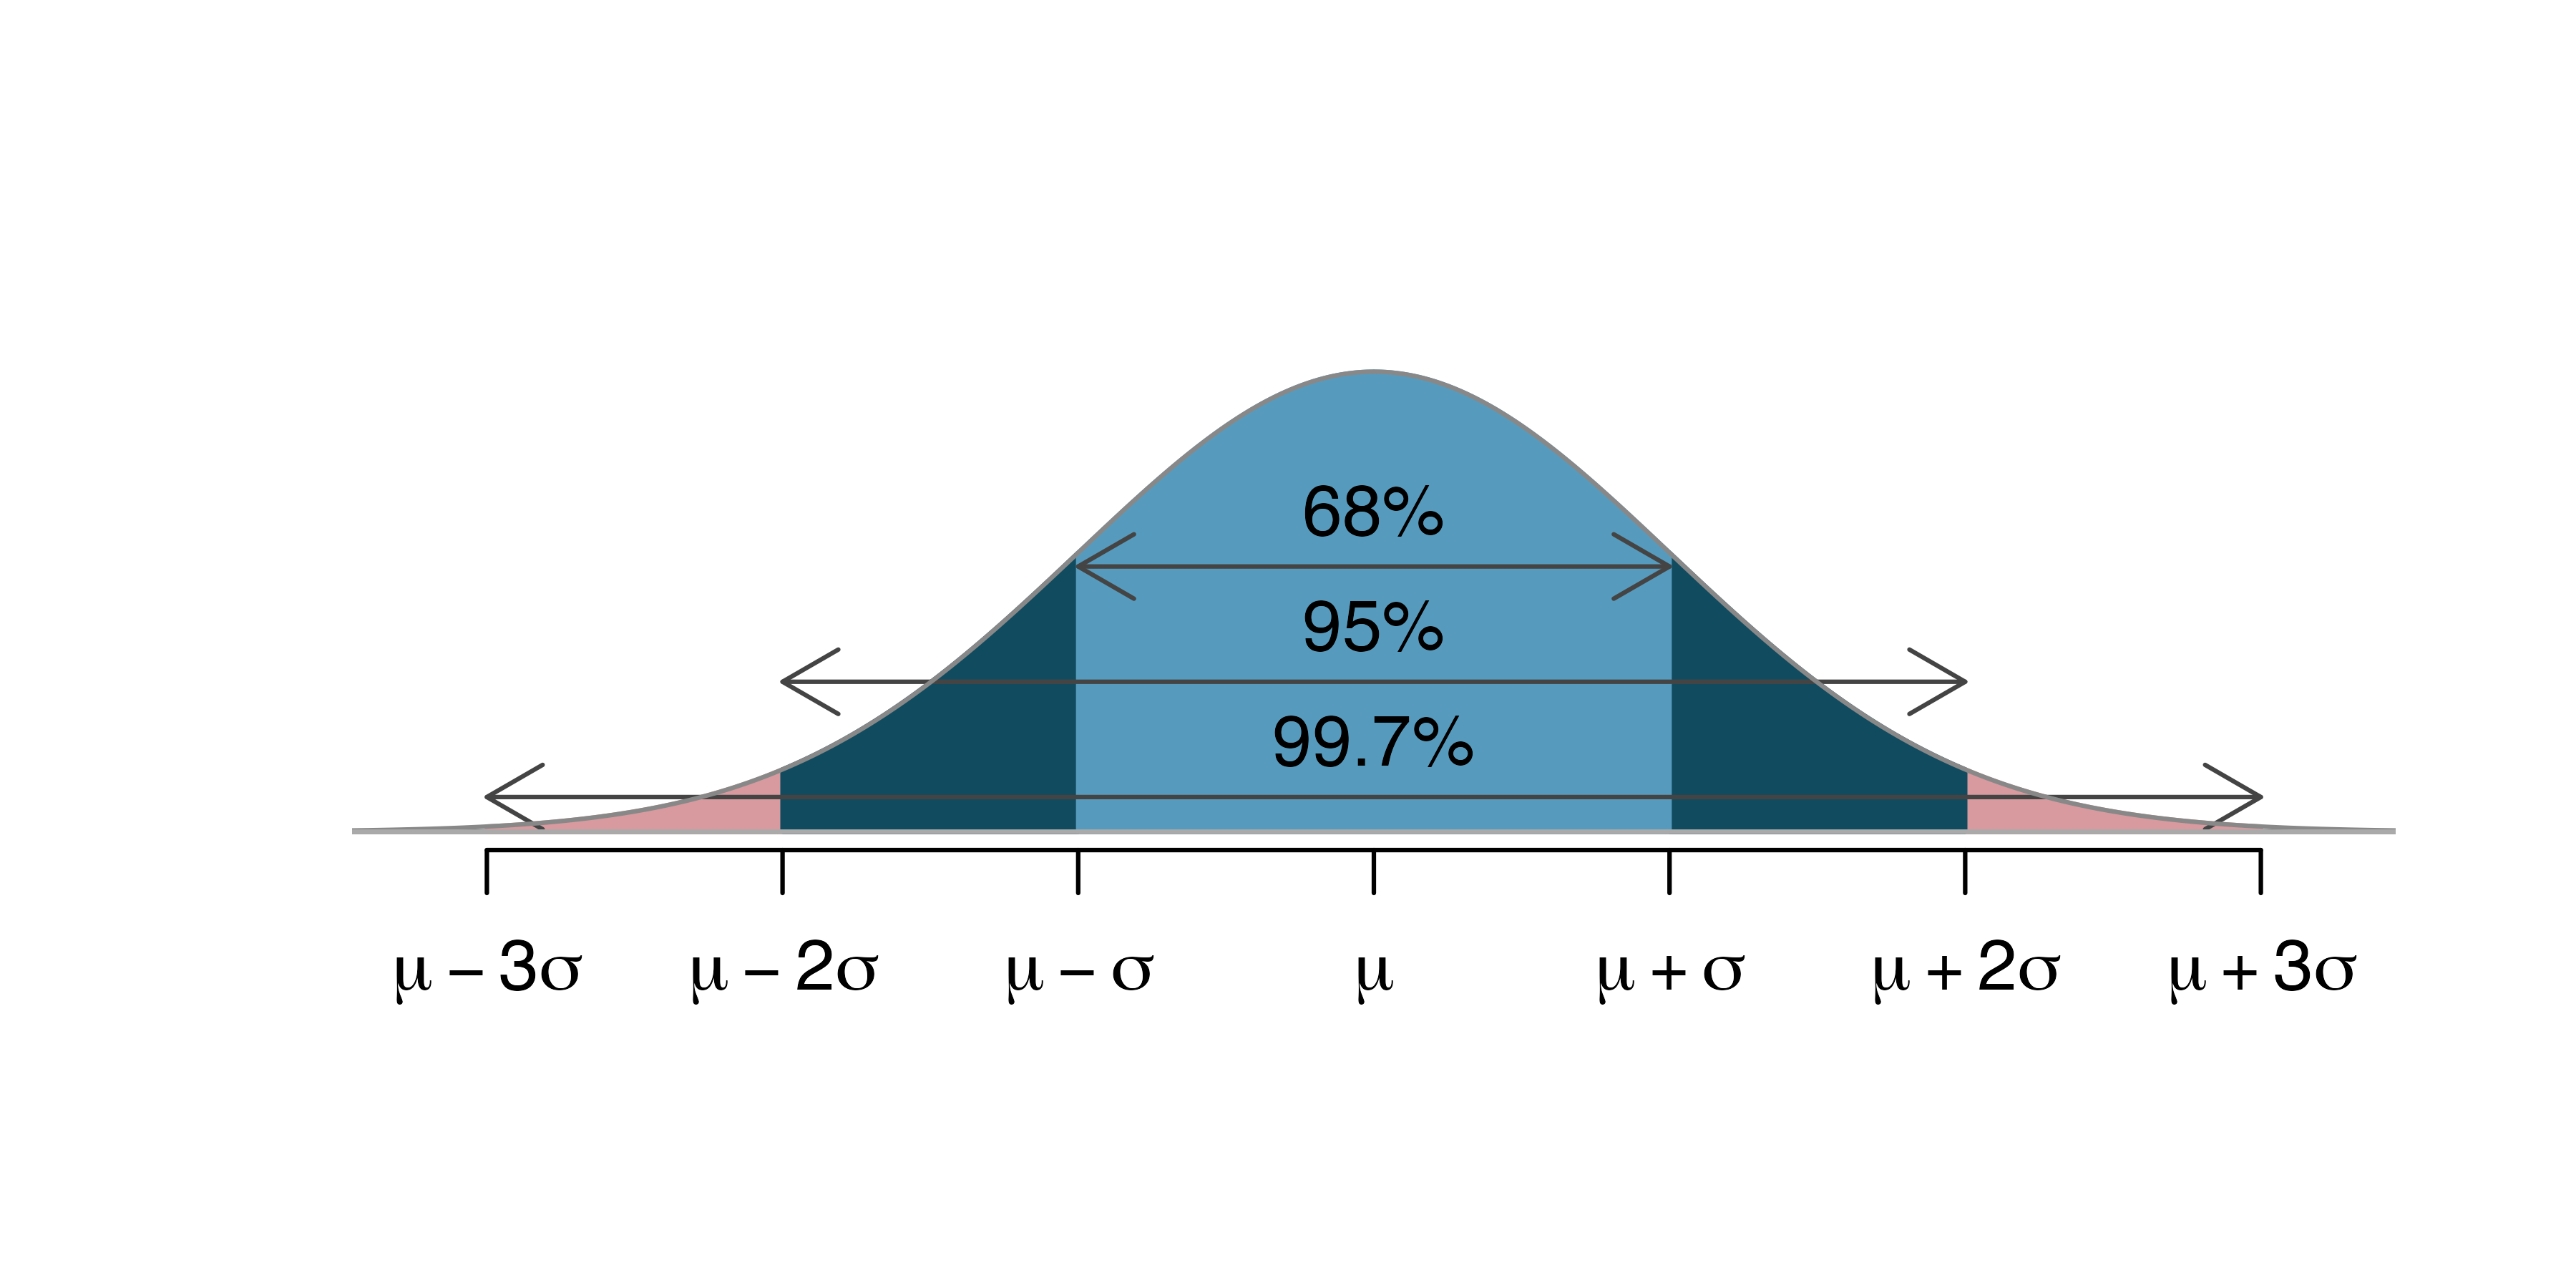 A normal curve showing the area within one standard deviation of the mean (which is 0.68), the area within two standard deviations of the mean (which is 0.95), and the are within three standard deviations of the mean (which is 0.997).